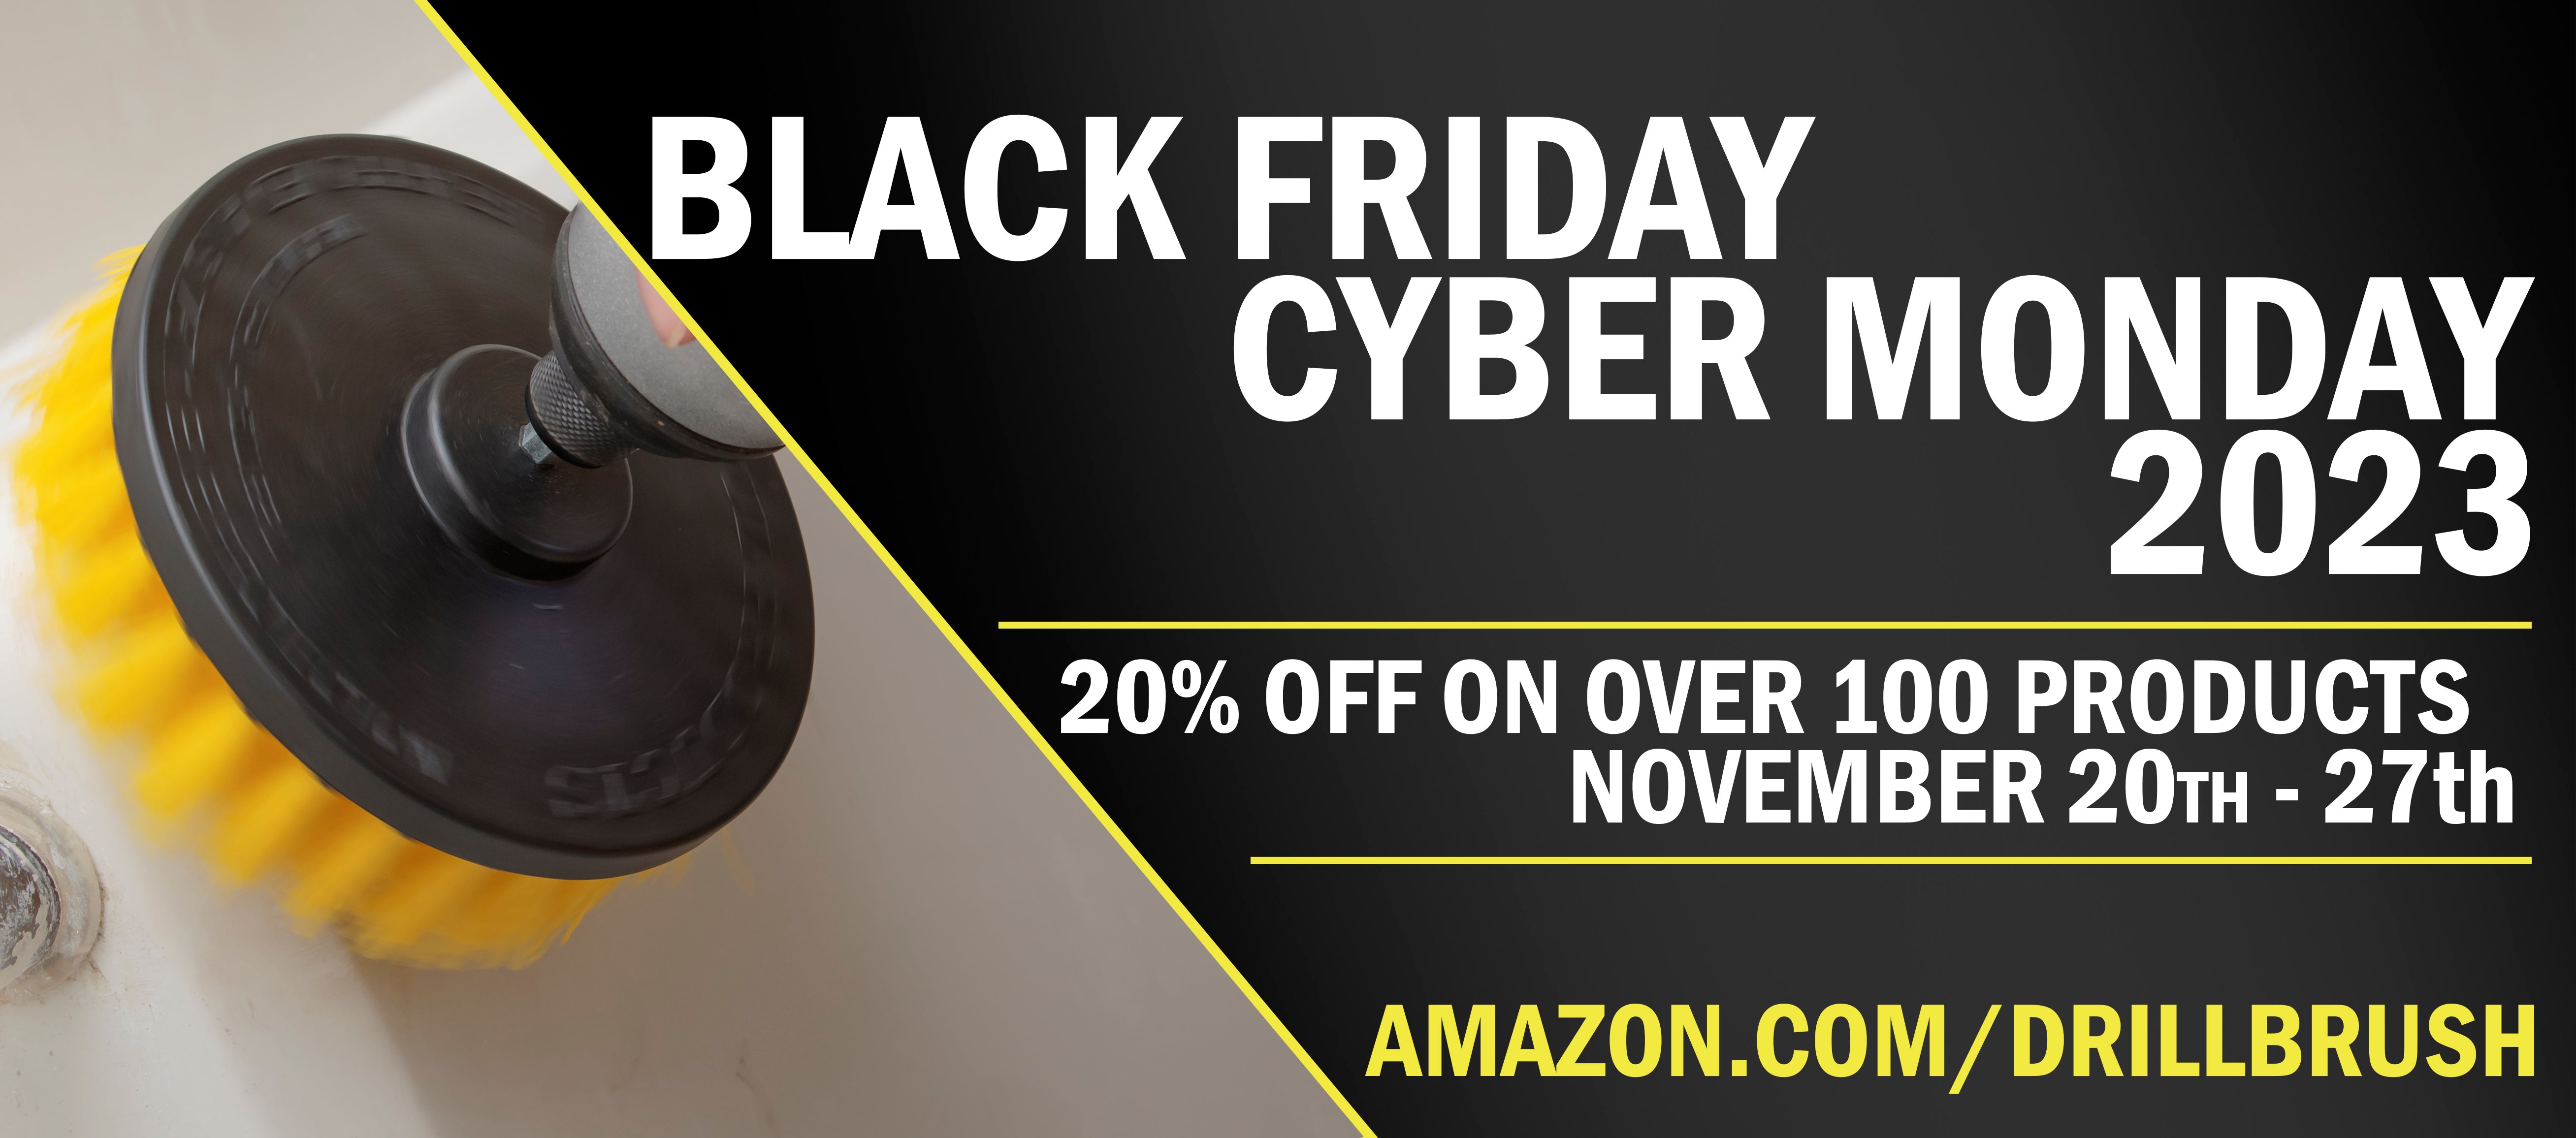 Drillbrush Amazon Black Friday and Cyber Monday 2023 Deals! Save 20% on Your Favorite Drillbrush Kits!